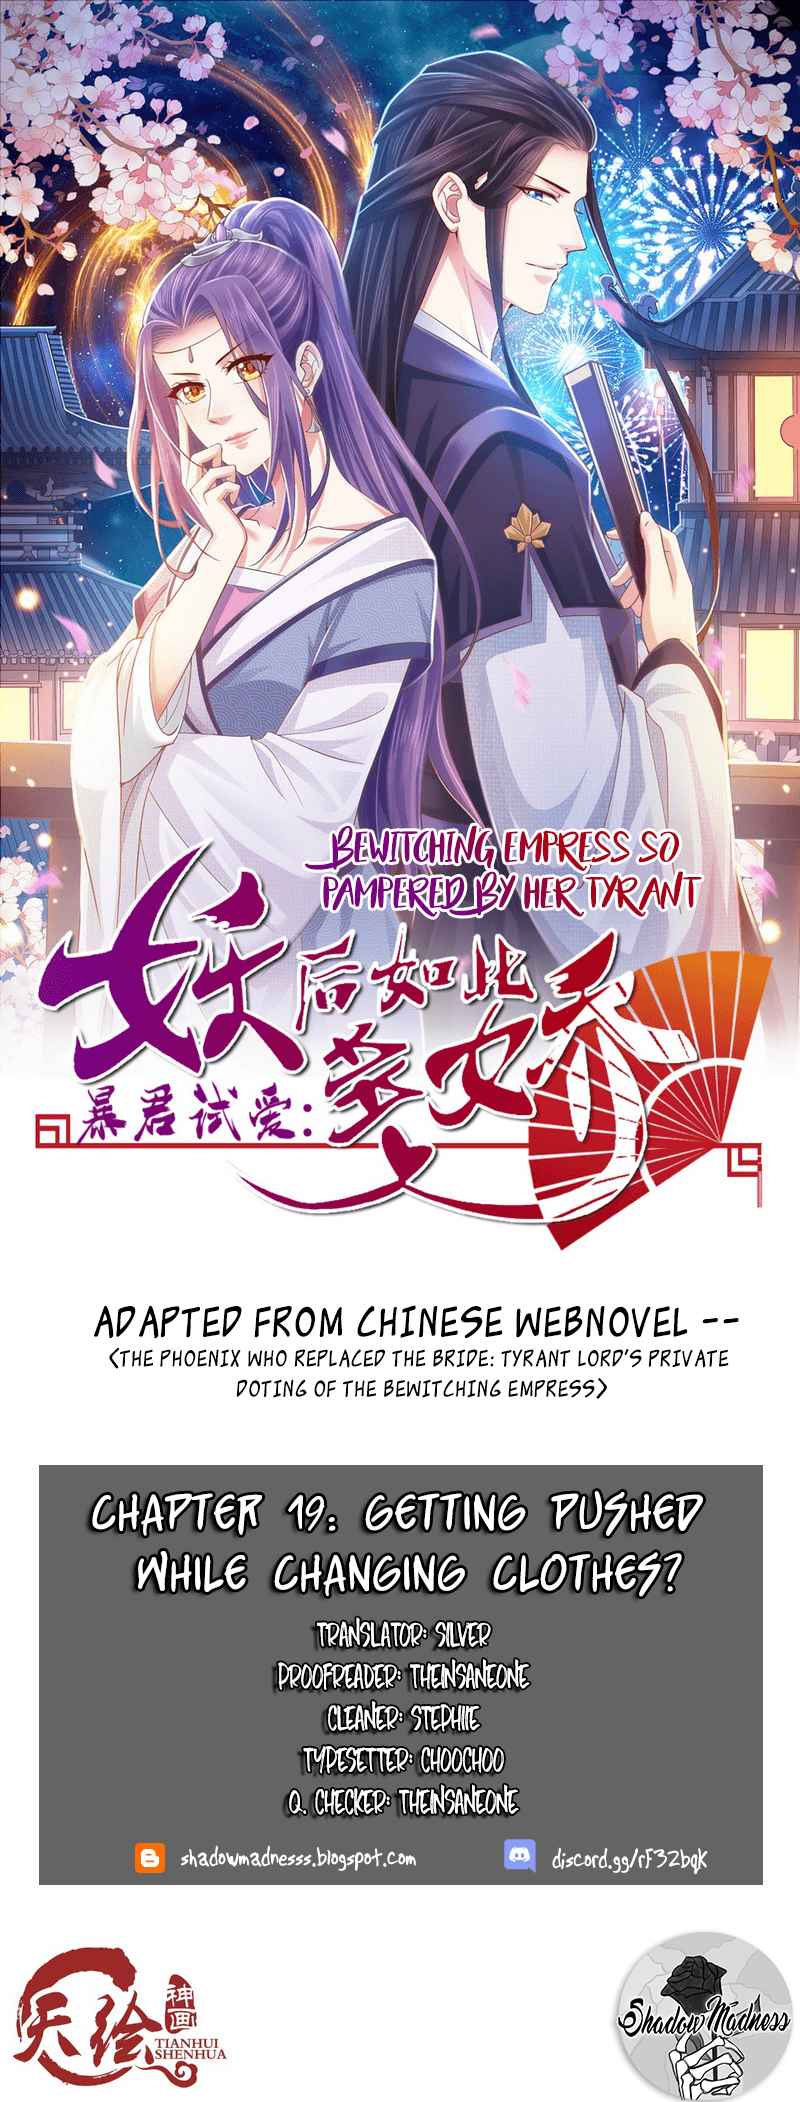 Bewitching Empress So Pampered by Her Tyrant Ch. 19 Getting pushed while changing clothes?